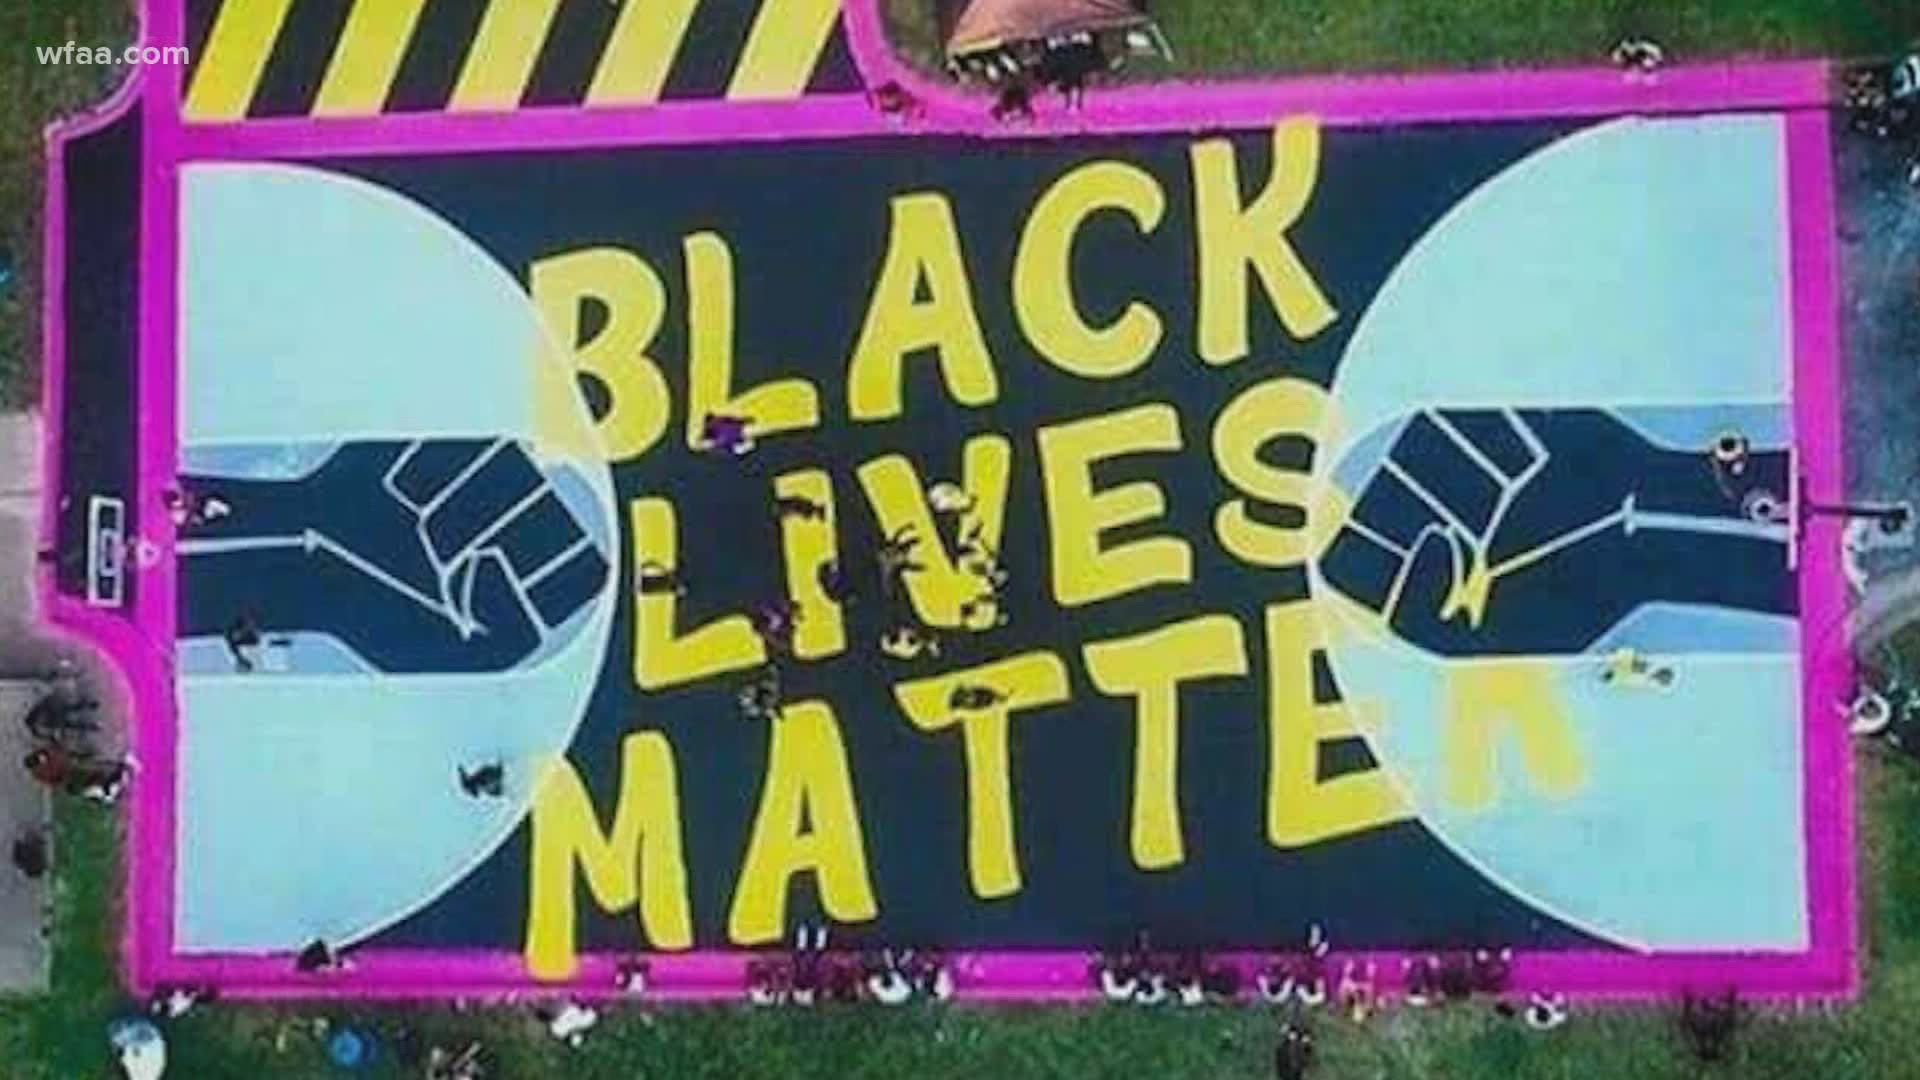 A basketball court at an apartment complex in the Highland Hills community of southern Dallas has been transformed into a Black Lives Matter mural.